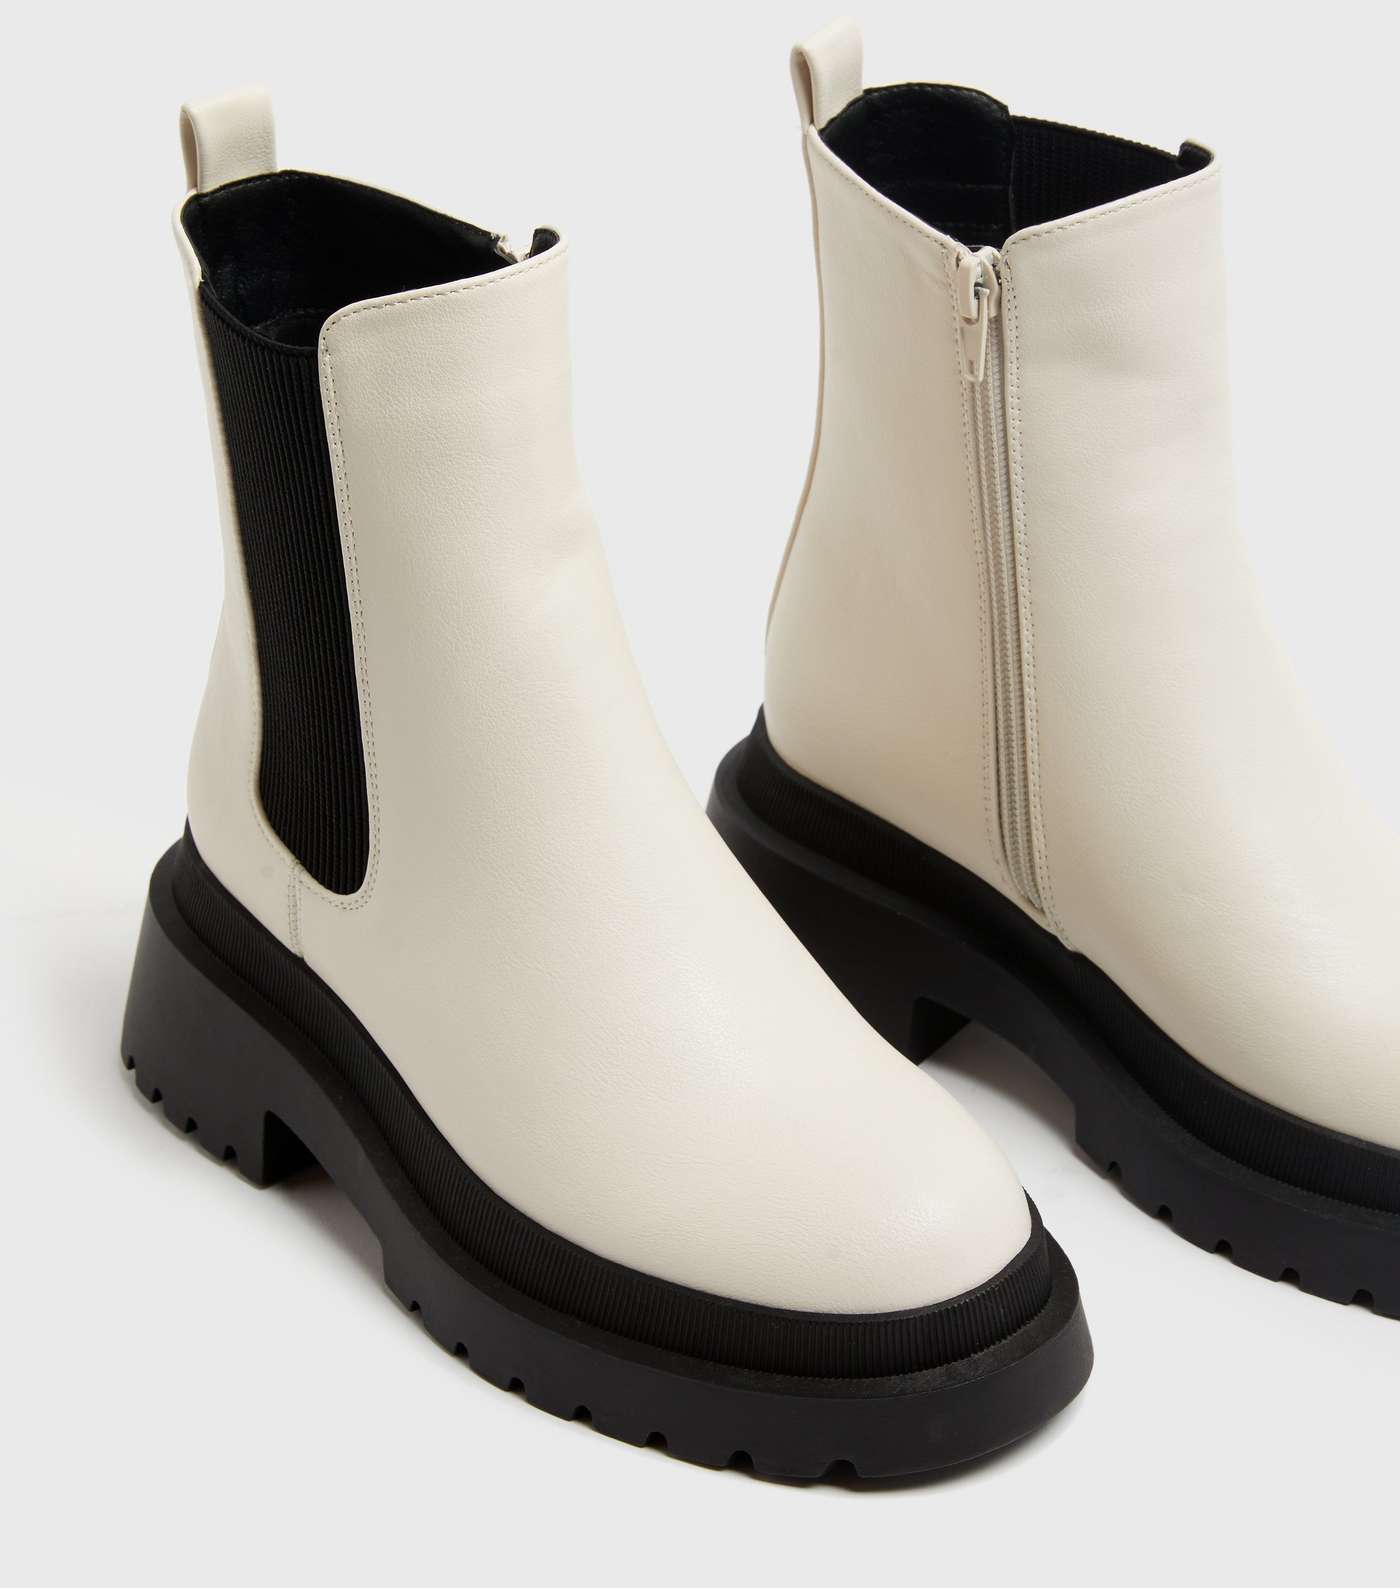 Off White Leather-Look High Ankle Chelsea Boots Image 3